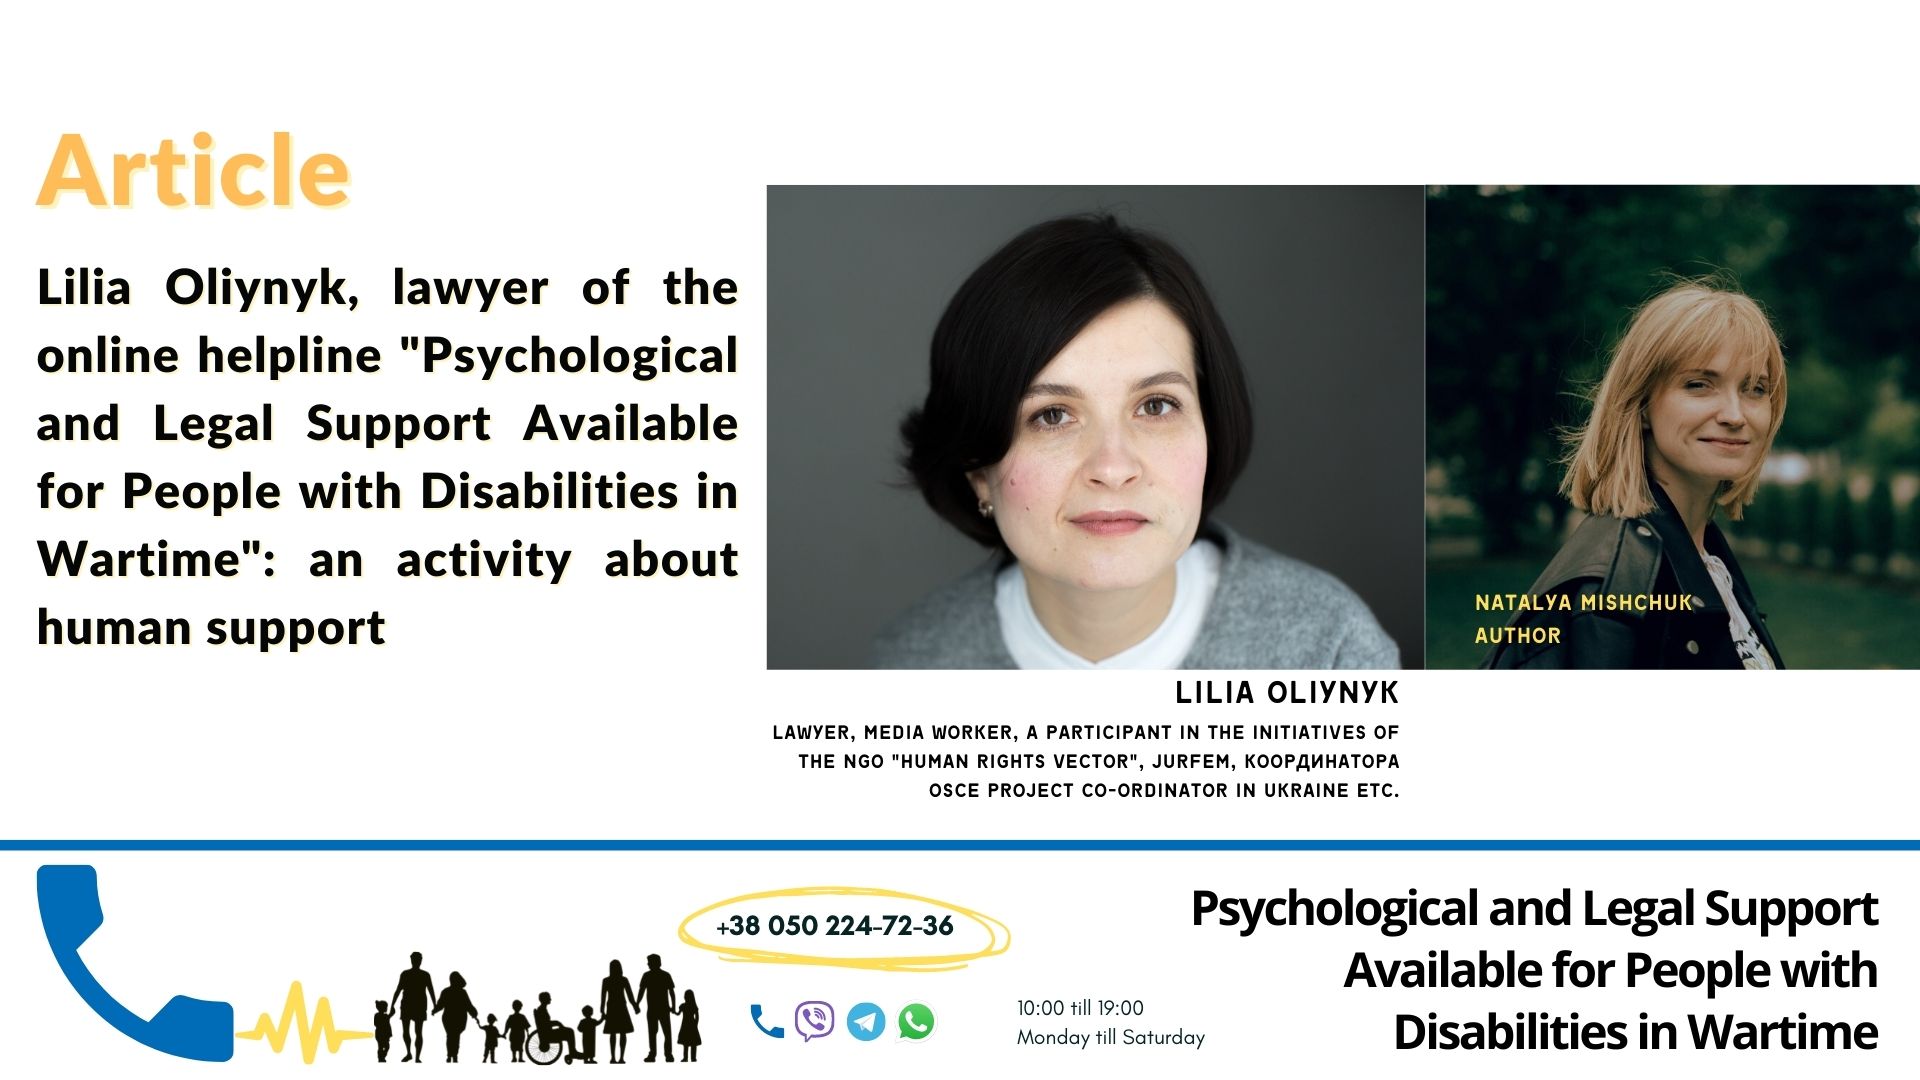 Lilia Oliynyk, lawyer of the online helpline "Psychological and Legal Support Available for People with Disabilities in Wartime": an activity about human support